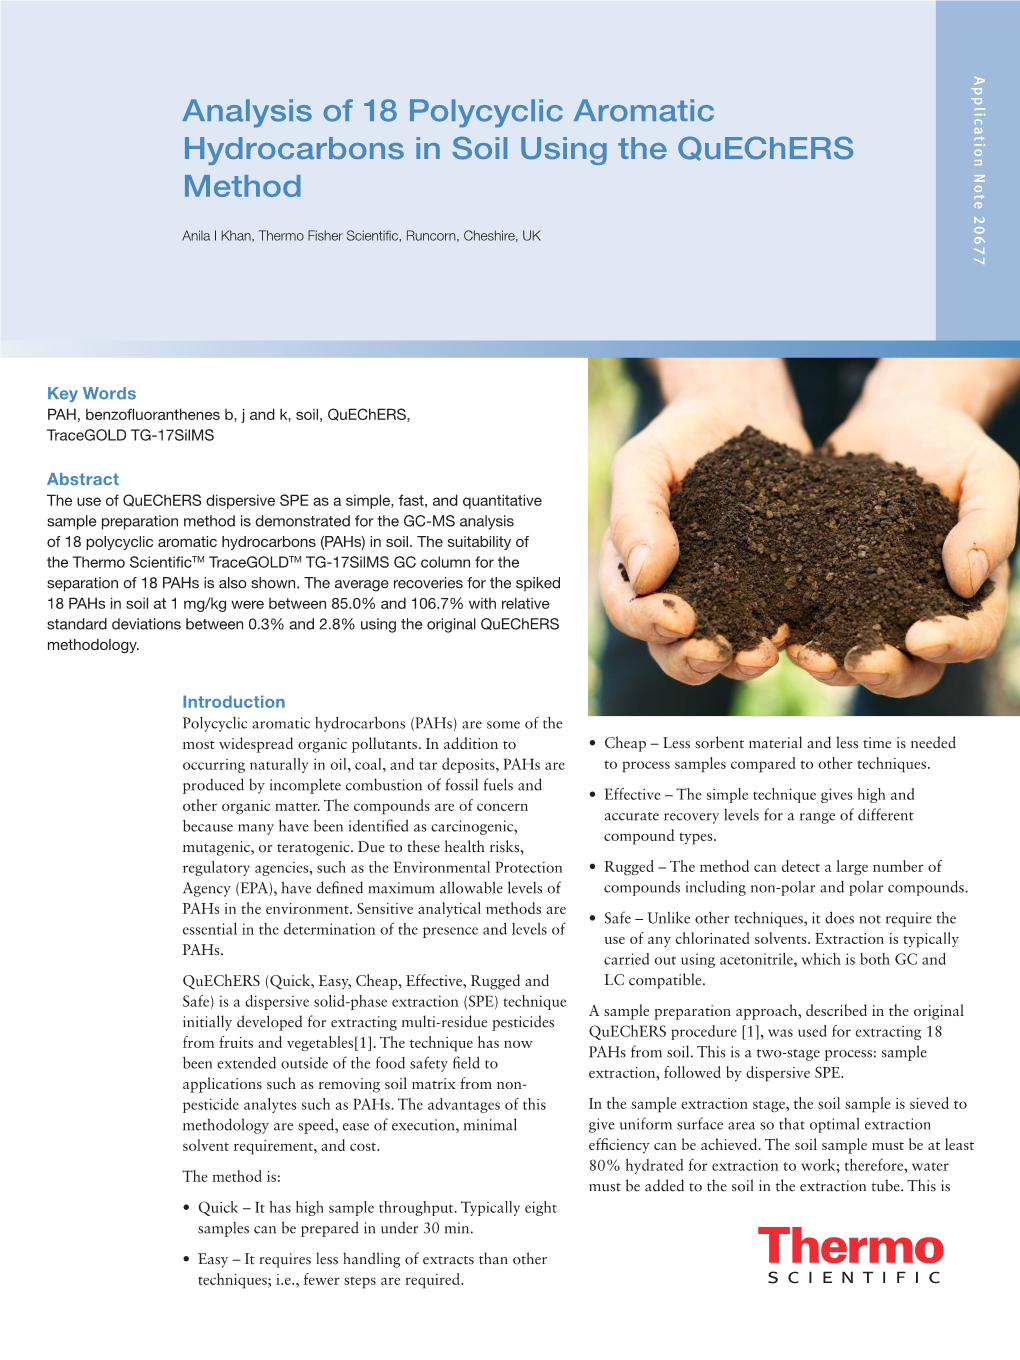 Analysis of 18 Polycyclic Aromatic Hydrocarbons in Soil Using The